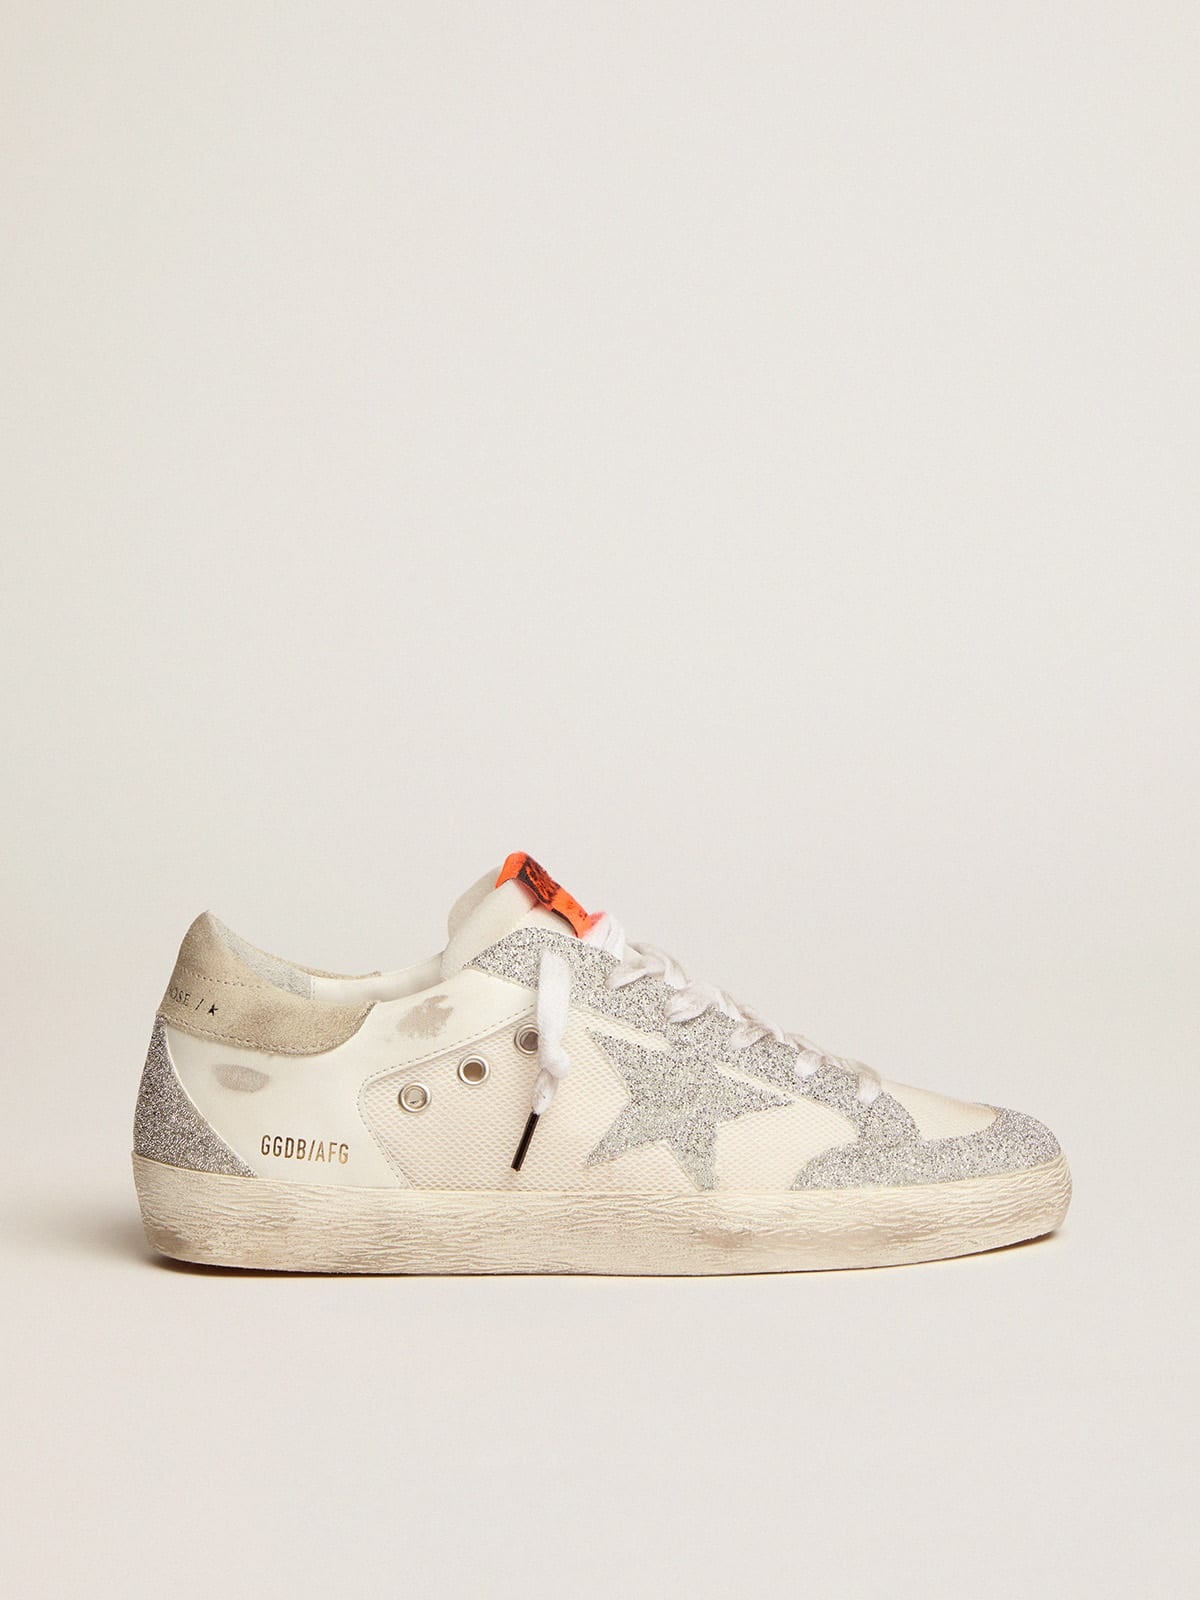 Golden Goose Super-Star LTD sneakers in white leather and mesh with star  and inserts in silver micro-crystals | REVERSIBLE